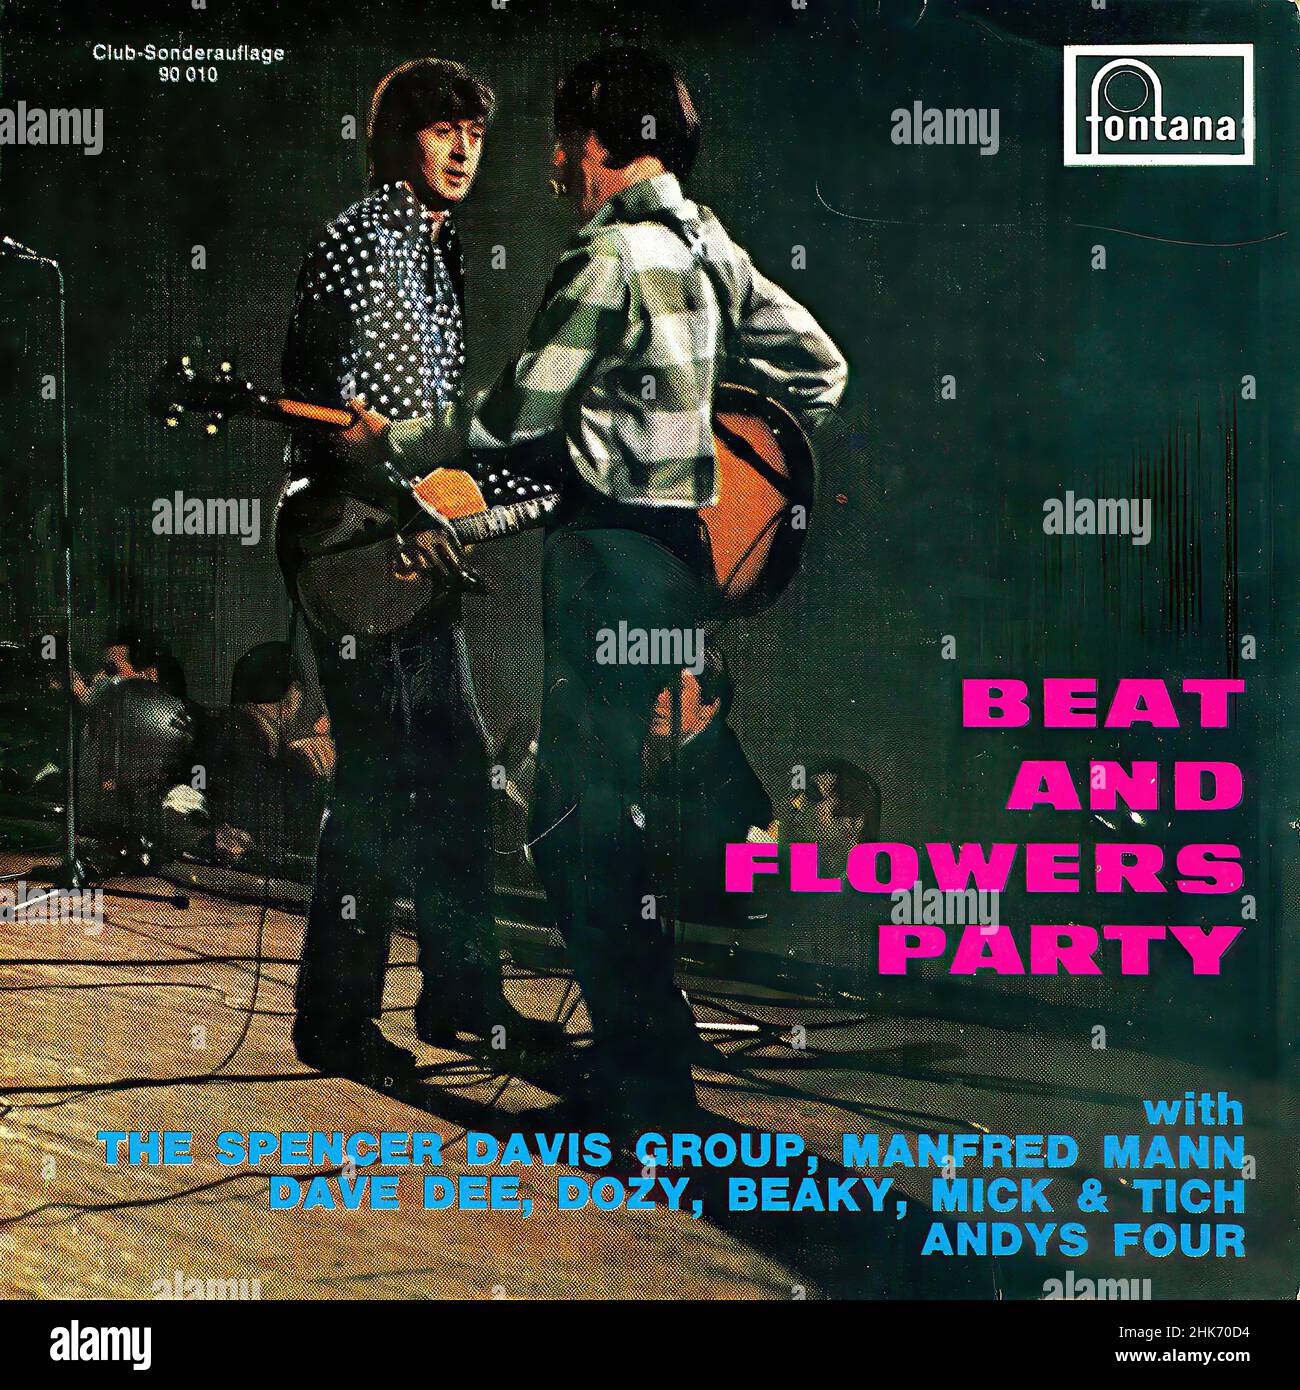 Copertina Vintage vinyl record - Spencer Davis Group, The - Manfred Mann - Dave Dee, Dozy Beaky, Mick & Tich - Andy's Four - Beat and Flowers Party - Austria - 1967 Foto Stock